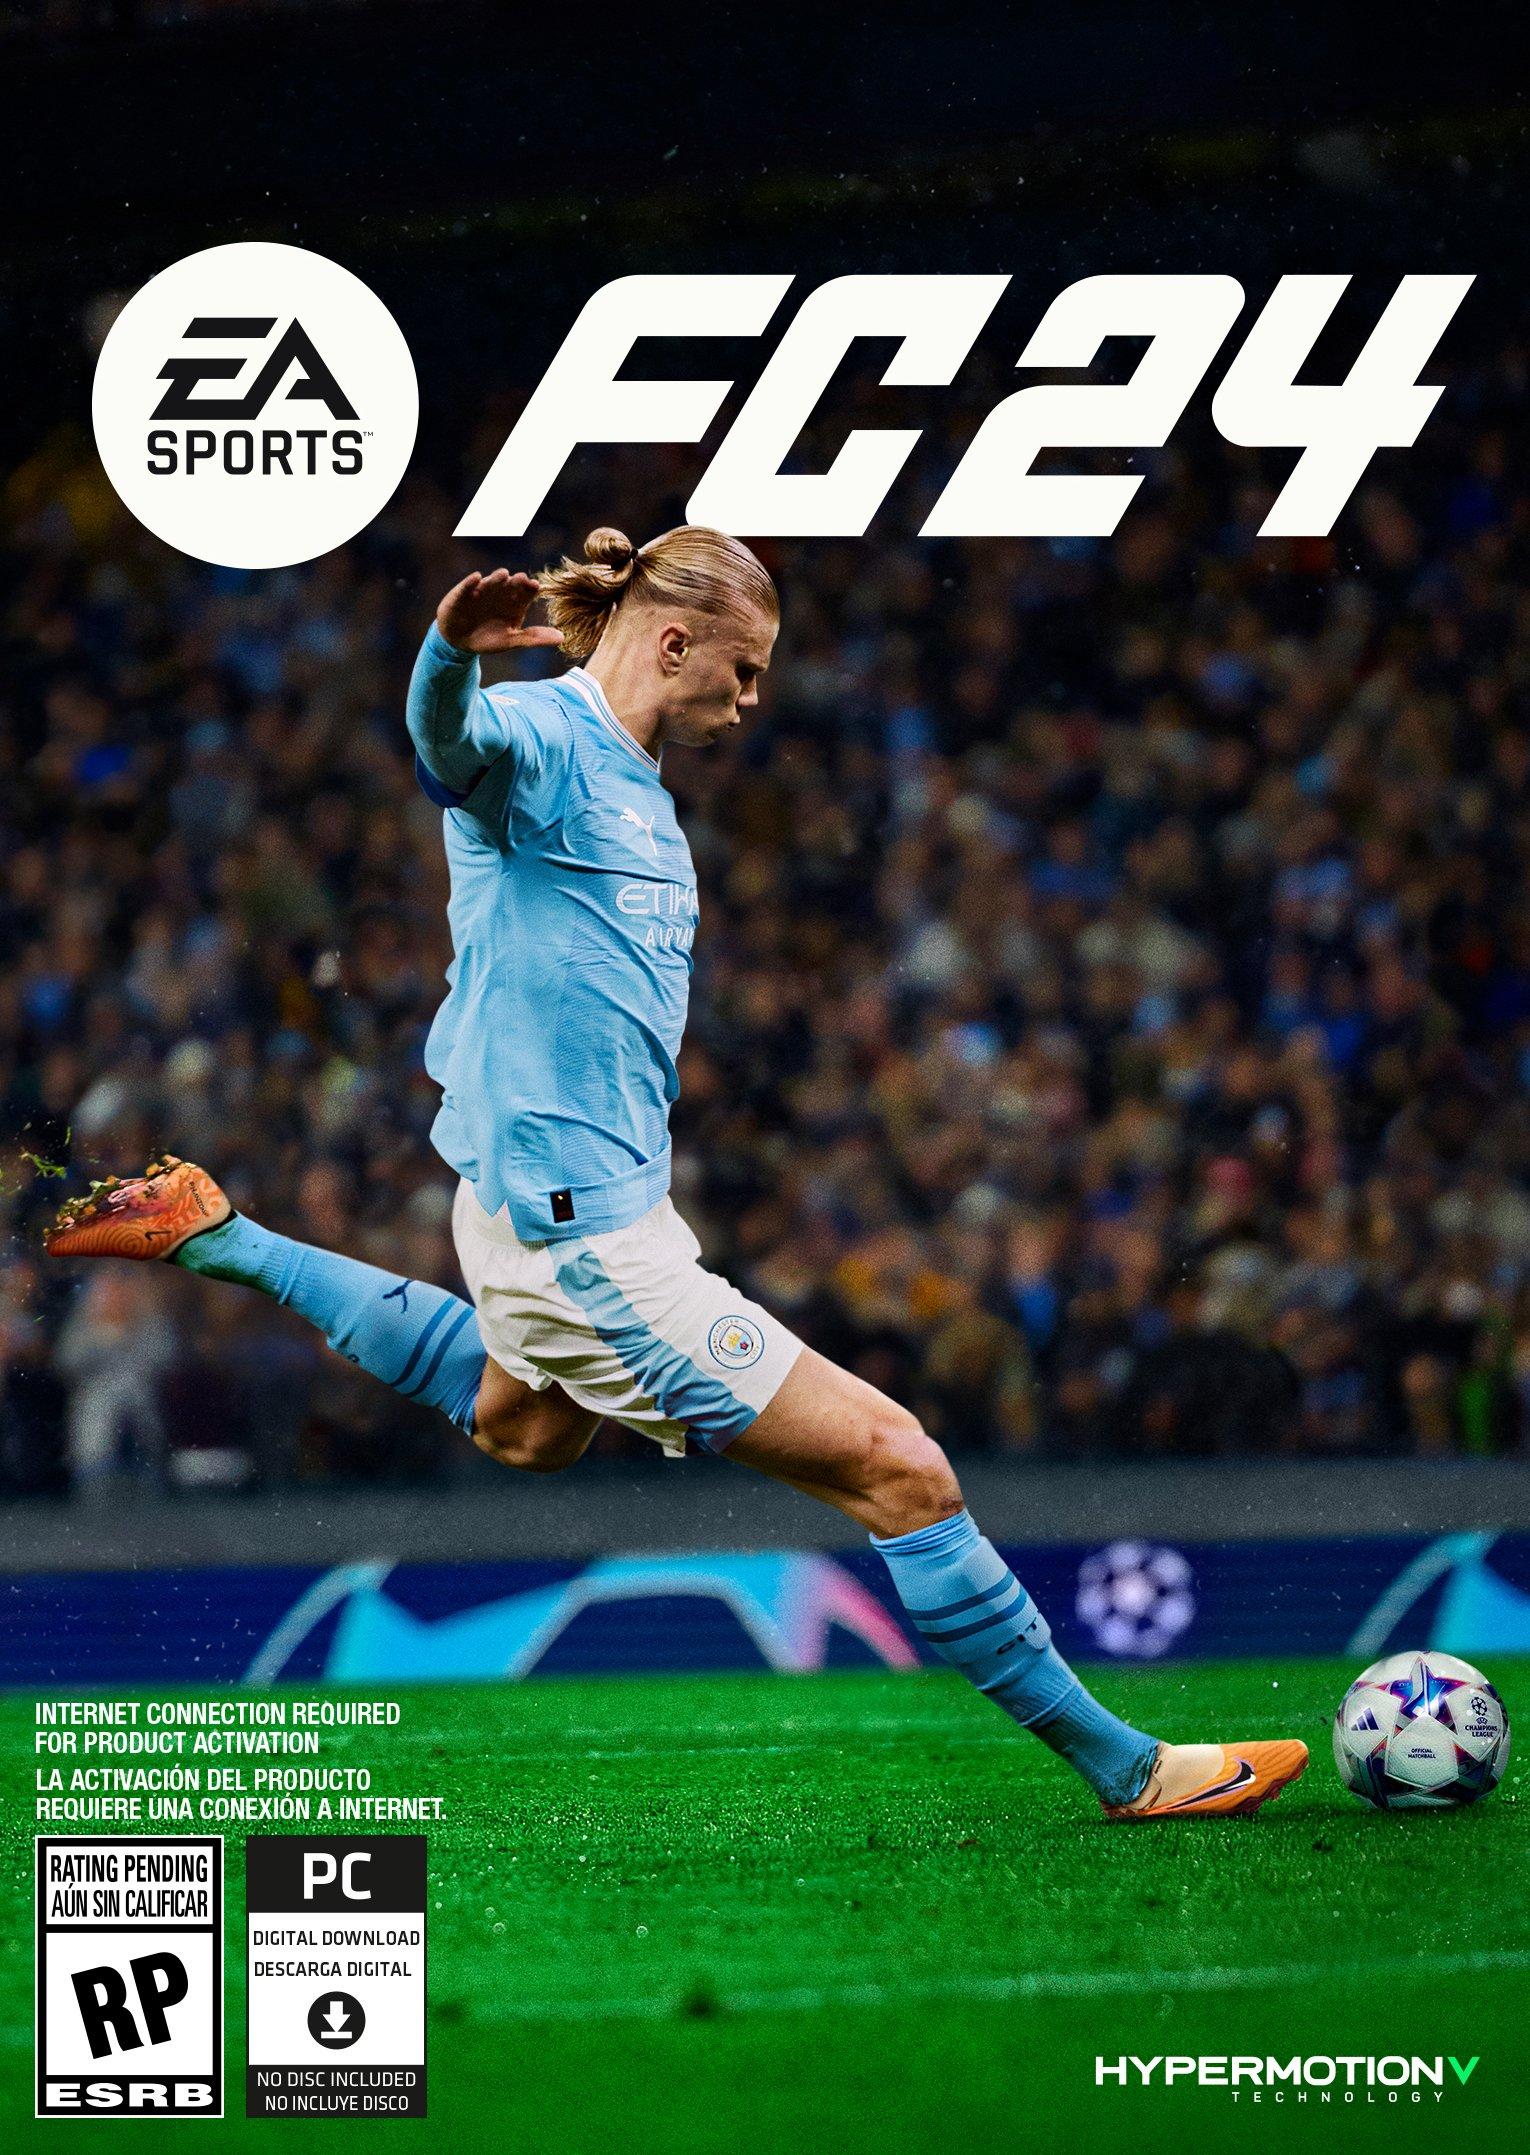 What's new and what are the differences between EA Sports FC 24 and FIFA  23? - Epic Games Store